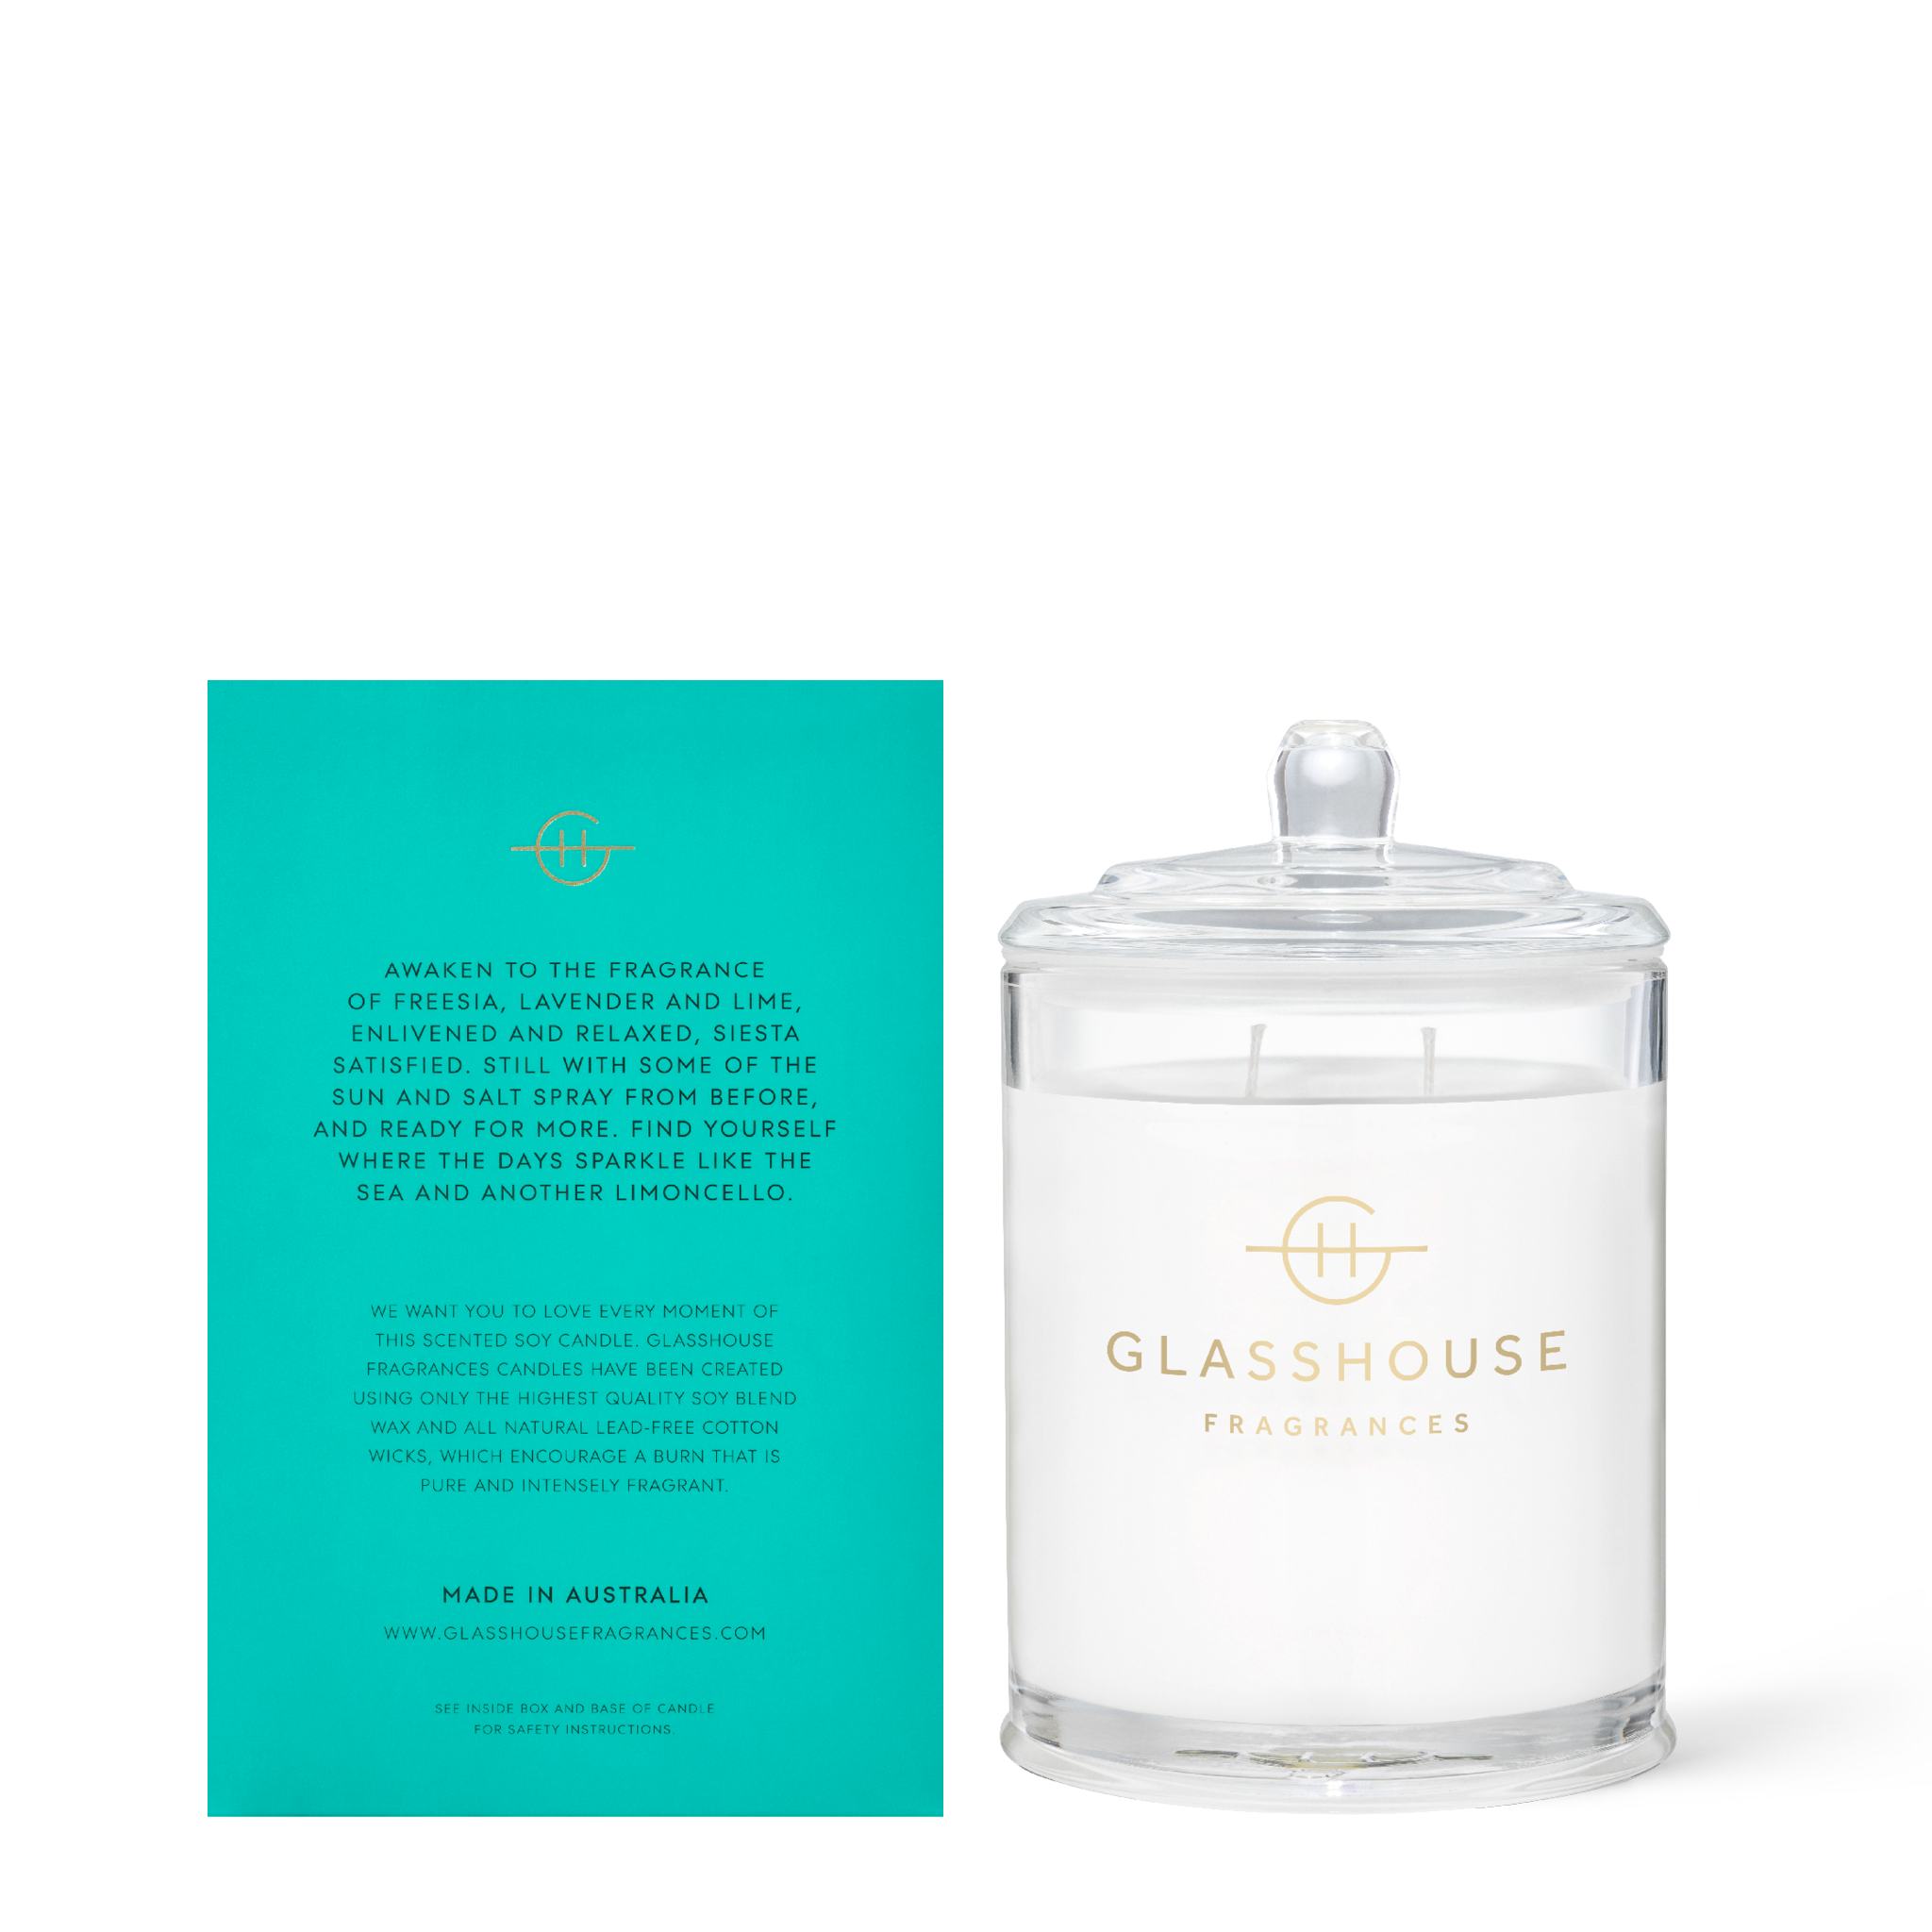 Glasshouse Fragrances Lost in Amalfi Sea Mist 380g Soy Candle with box - back of product shot